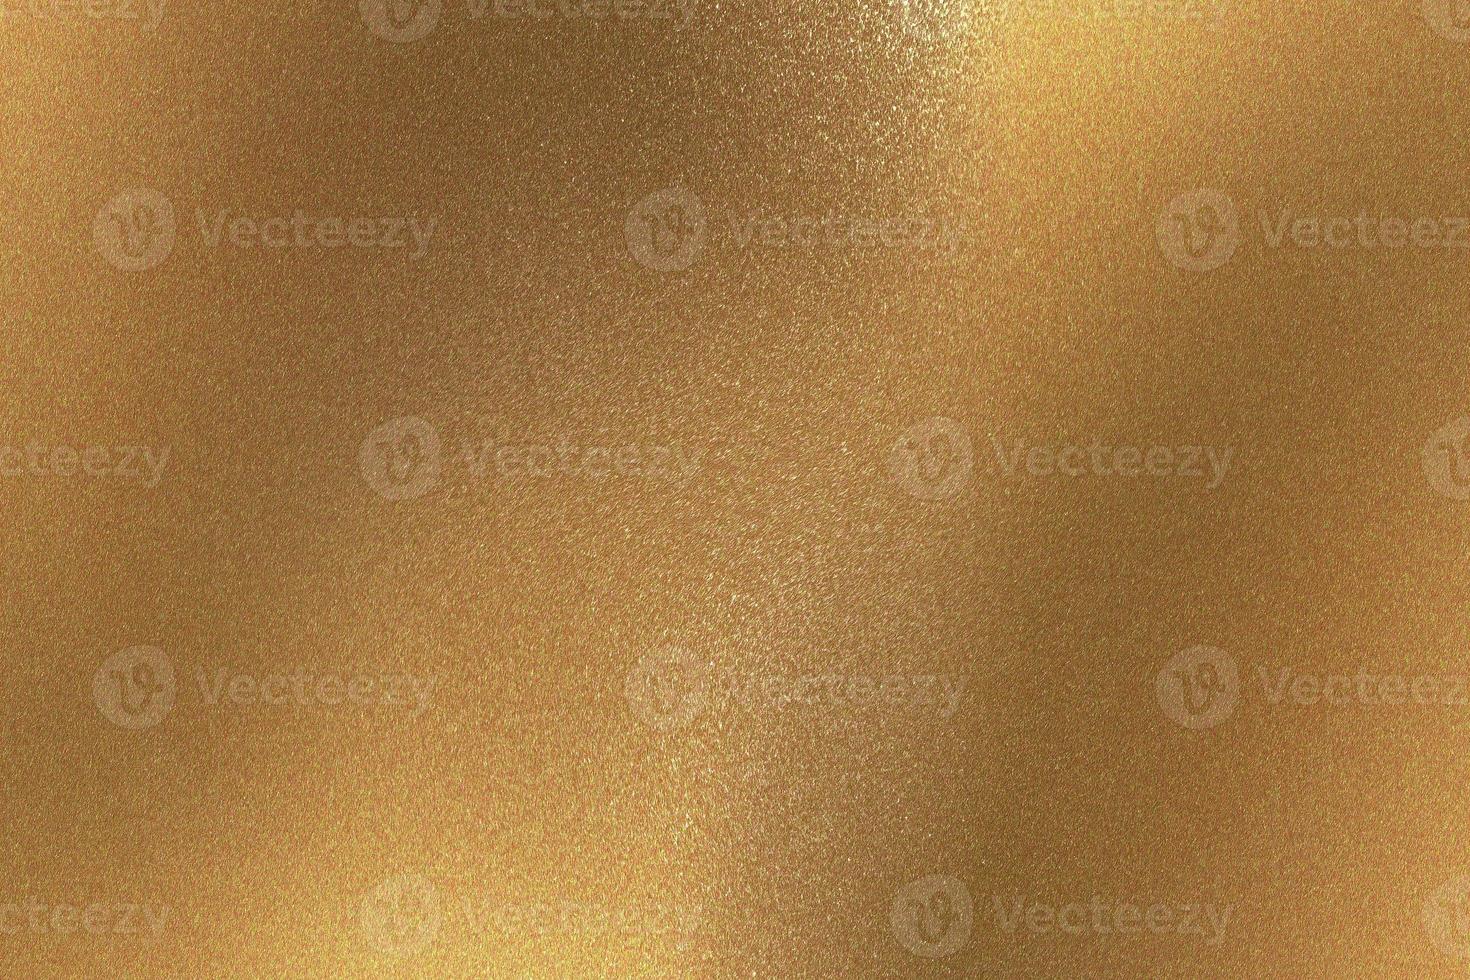 Glowing copper wall wave surface, abstract background photo